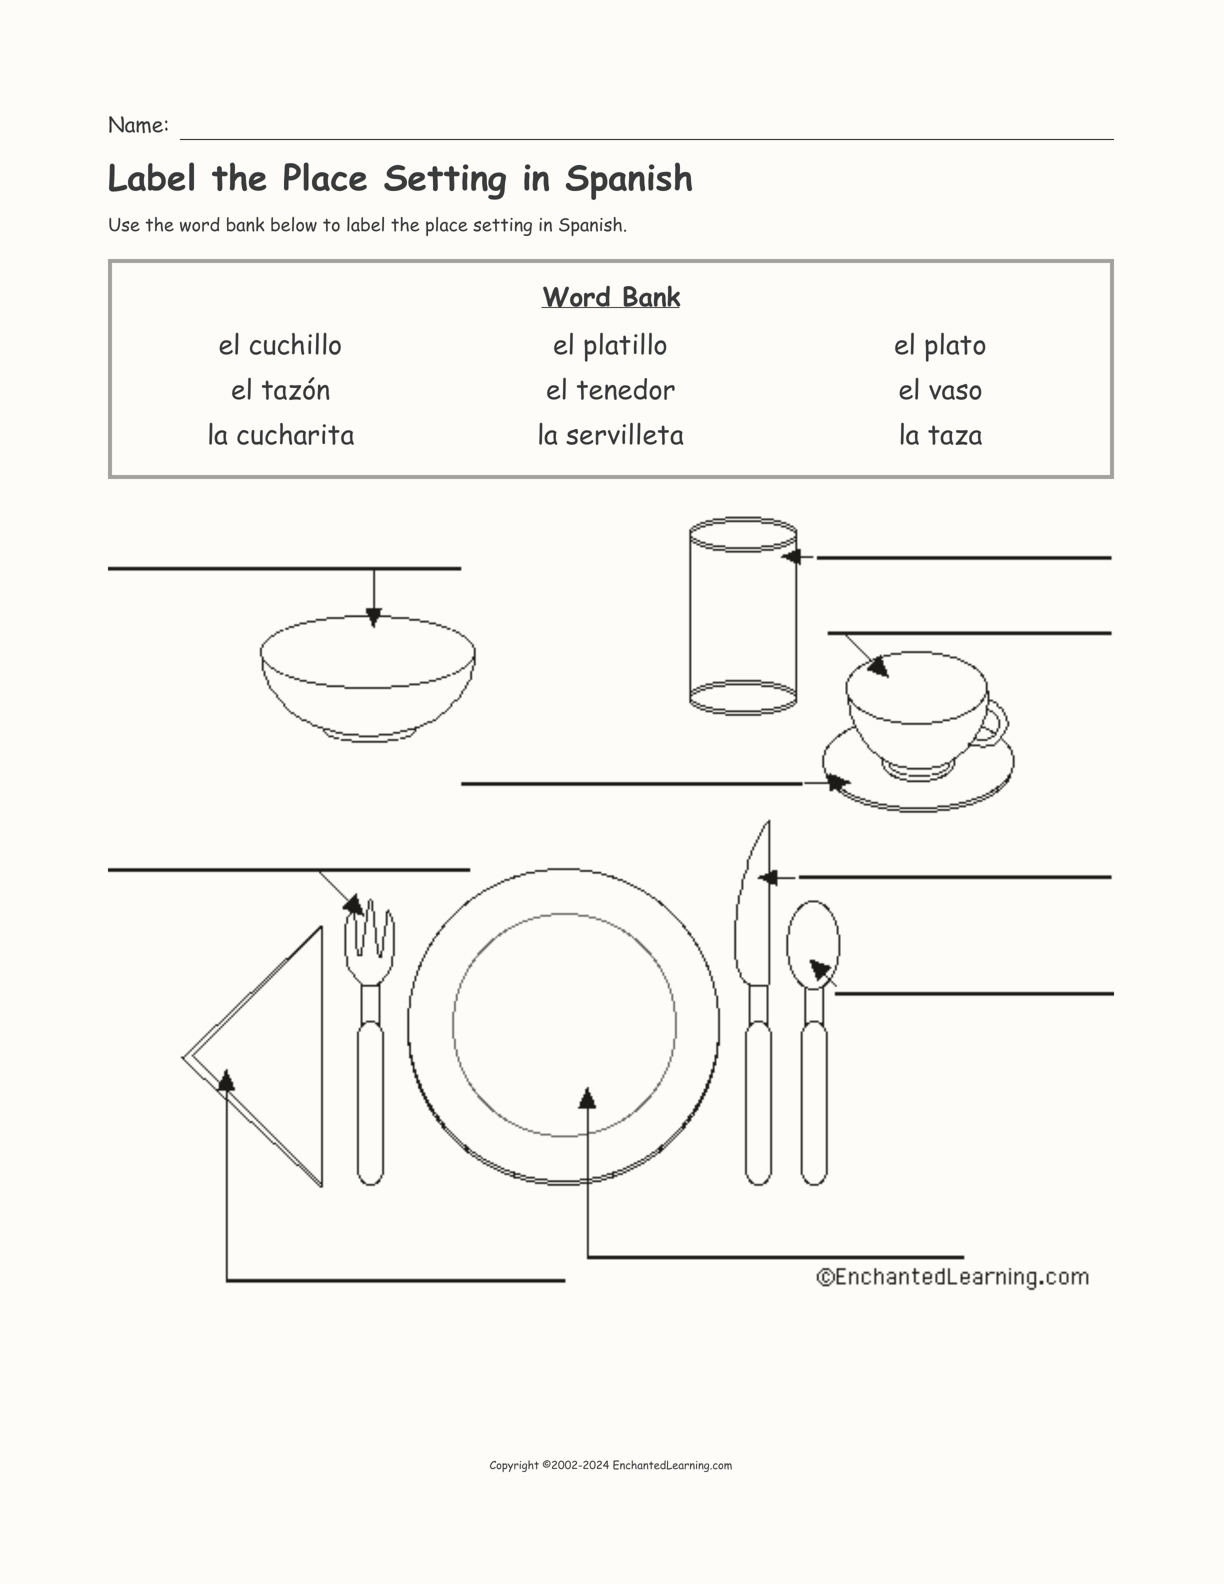 Label the Place Setting in Spanish interactive worksheet page 1